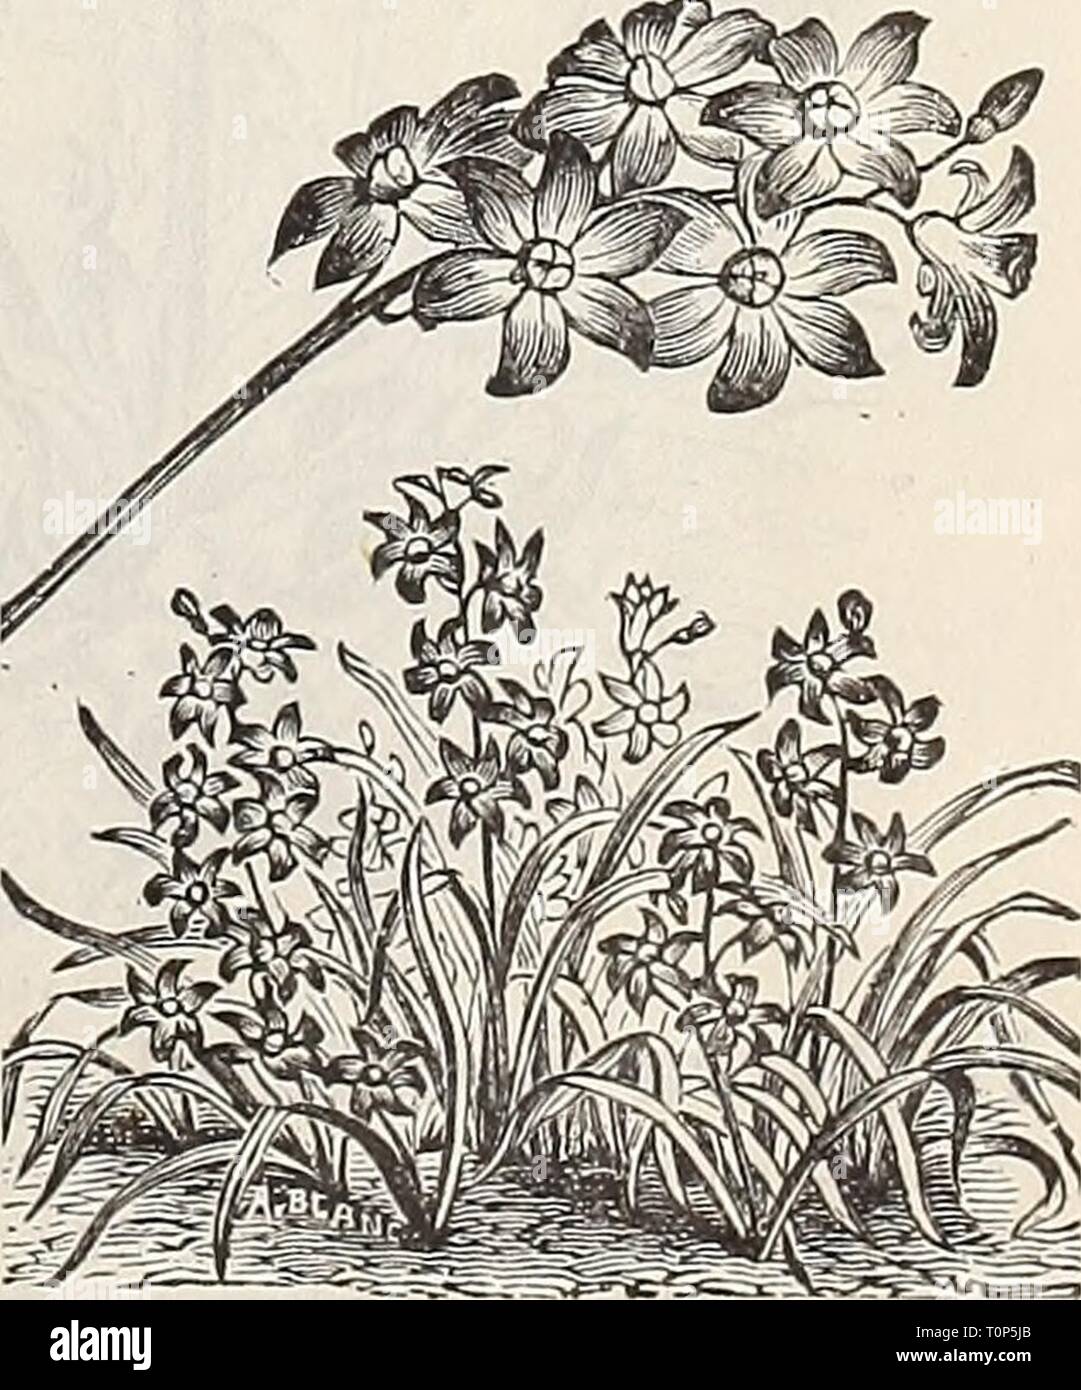 Dreer's autumn catalogue  1896 Dreer's autumn catalogue : 1896 bulbs, plants, seeds  dreersautumncata1896henr Year: 1896  chionodoxa. ( Glory of the Snow.) BABIANA. A charming genus with leaves of darkest green, thickly covered with downy hairs, and bearing showy spikes of flowers. They should have the pro- tection of a cold-frame, and are very successfully grown in pots. Height, 6 to 9 inches. Mixed Varieties. 3 for 10 cts., 40 cts. per doz., §3.00 per 100. CALOCHORTUS. (Mariposa, or Butterfly Tulip.) Very beautiful California bulbs, blooming in summer. The flowers are of rich and brilliant c Stock Photo